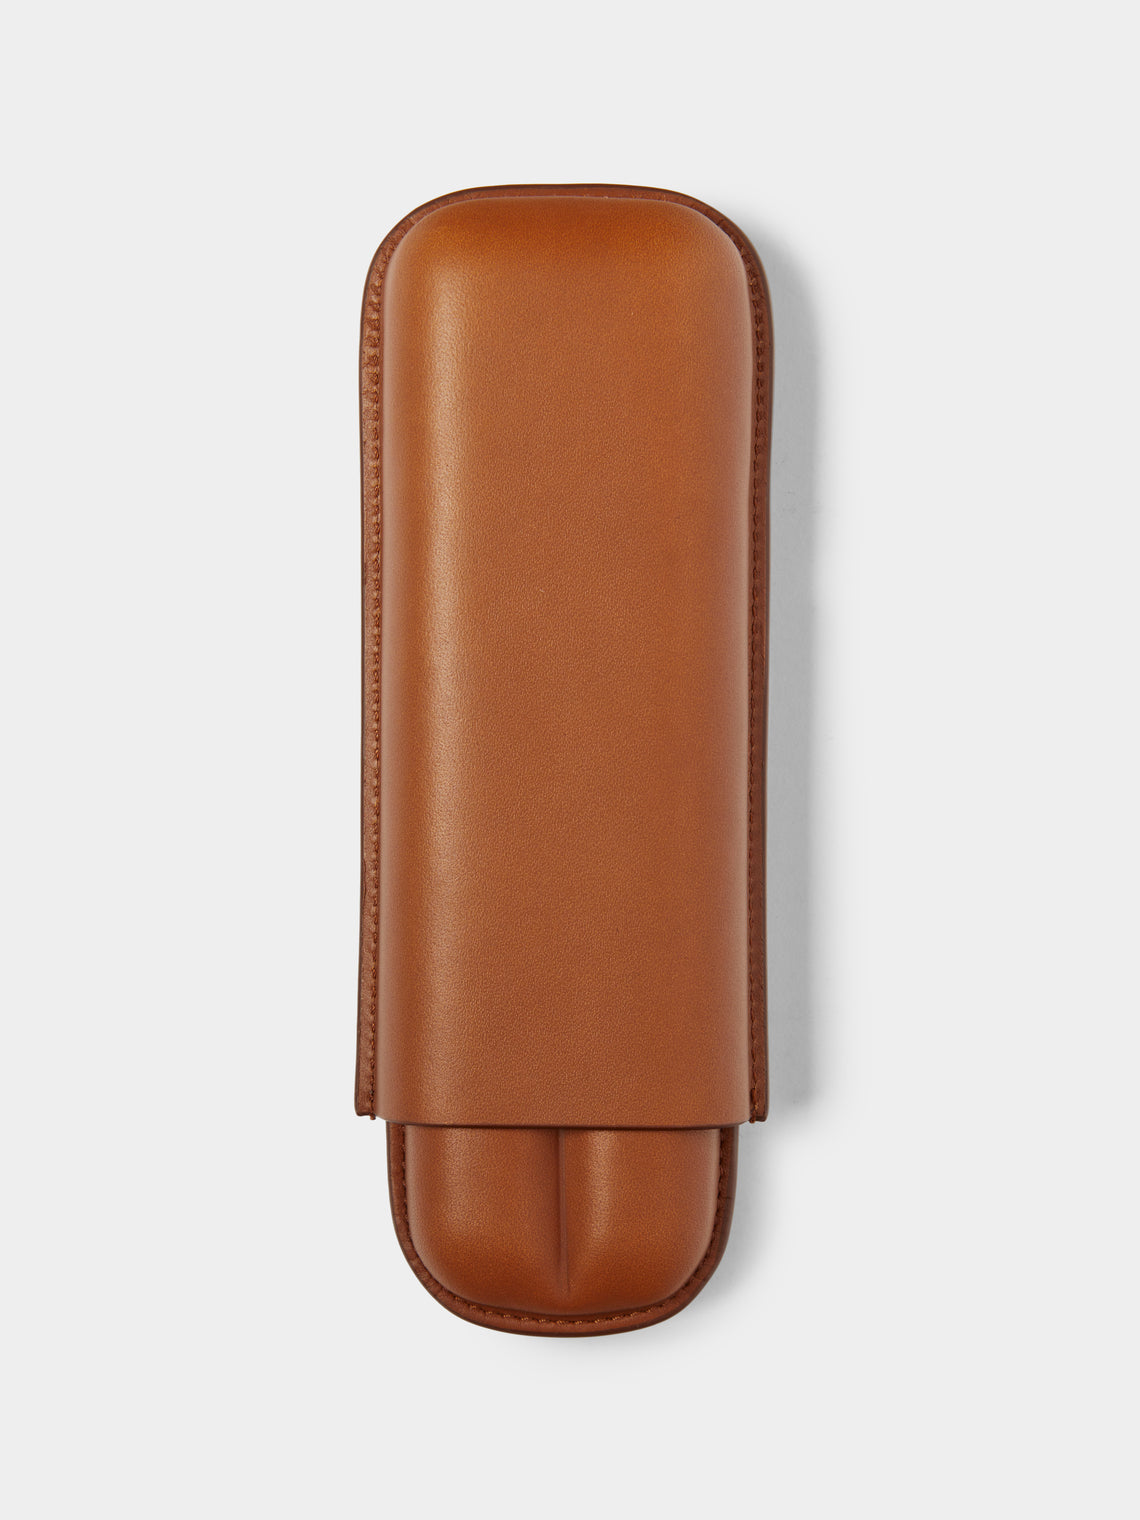 Connolly - Leather Cigar Case -  - ABASK - 